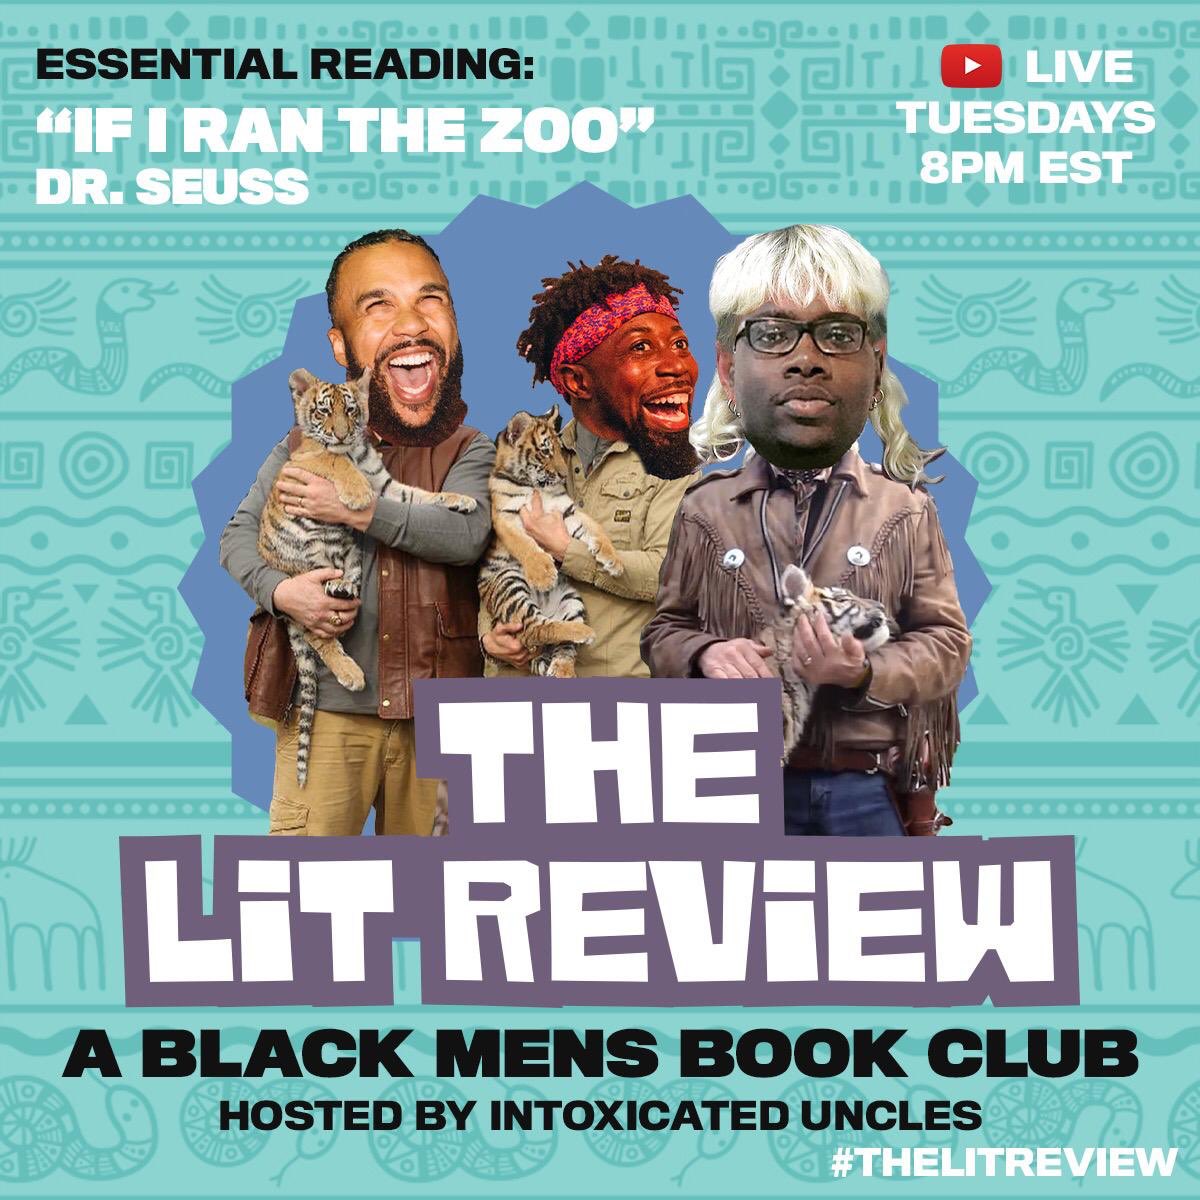 Today me and my bredren are back with episode 6 of The Lit Review, hosted by me @nanakwabena & @yusufyuie. Join us in discussing “If I Ran the Zoo” by Dr. Seuss. ⁣
⁣Does Dr. Seuss play a role in racial propaganda? Tune in today with your 🍷 or 🌳💨 at 5PM PST on #TheLitReview.